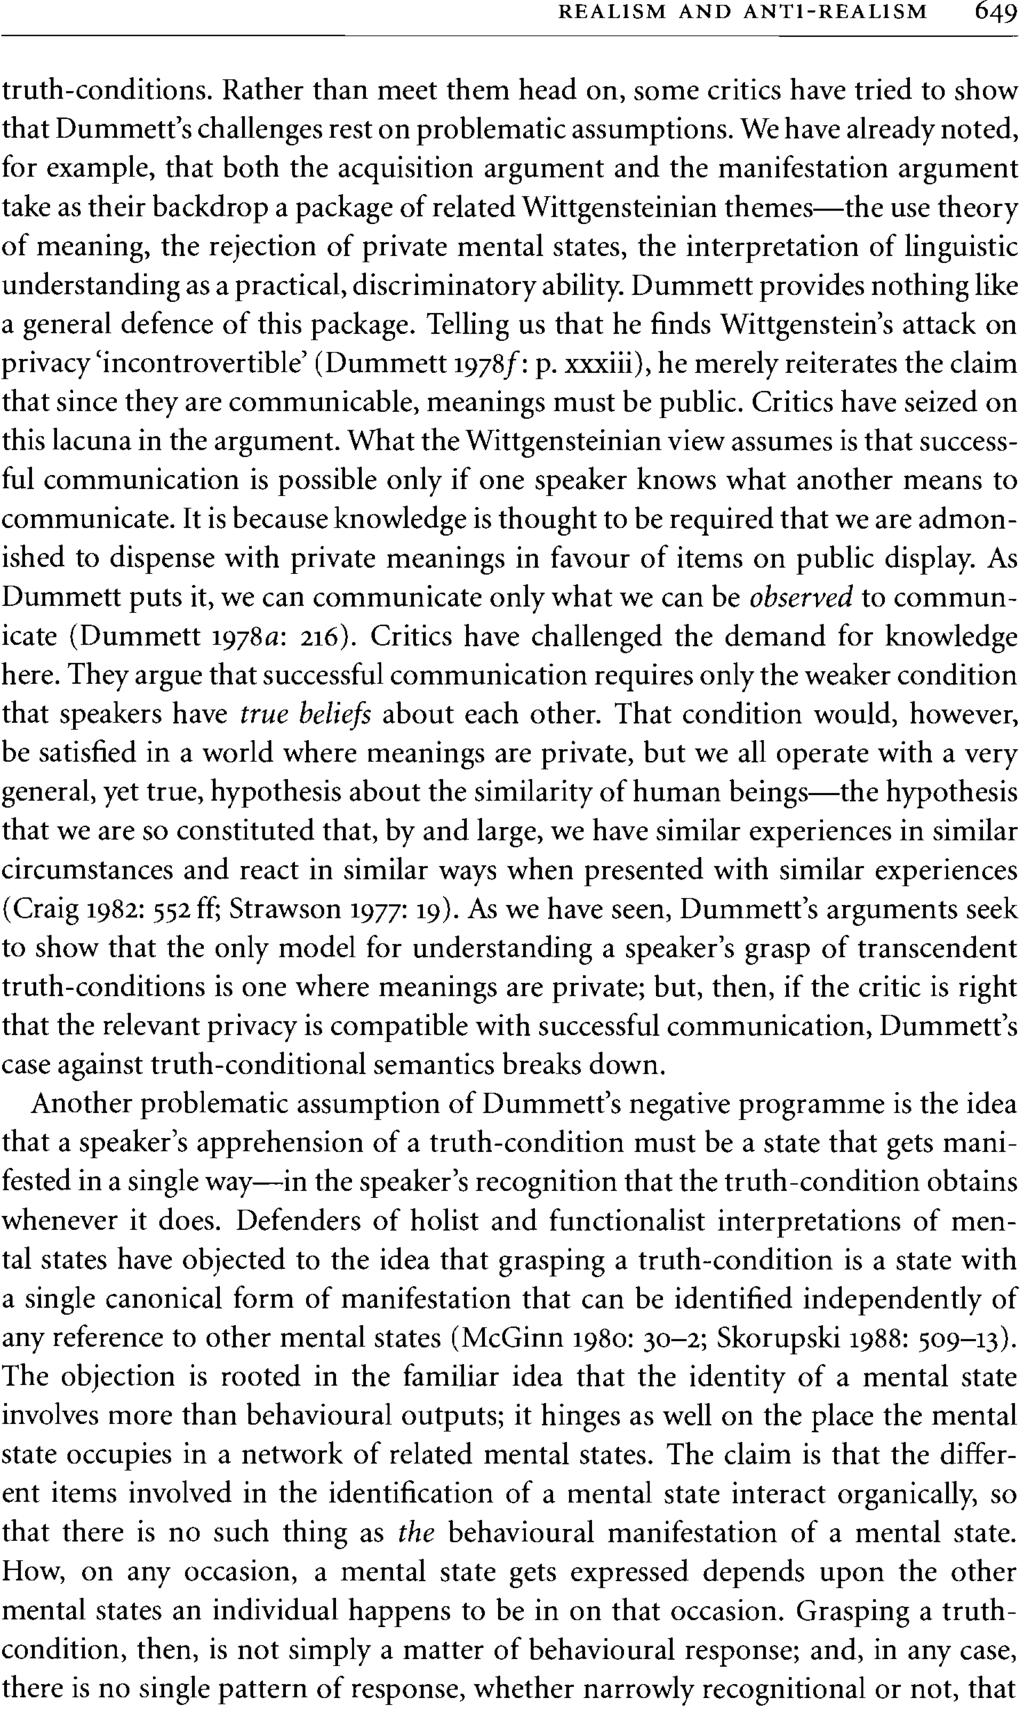 REALISM AND ANTI-REALISM 649 truth-conditions. Rather than meet them head on, some critics have tried to show that Dummett's challenges rest on problematic assumptions.